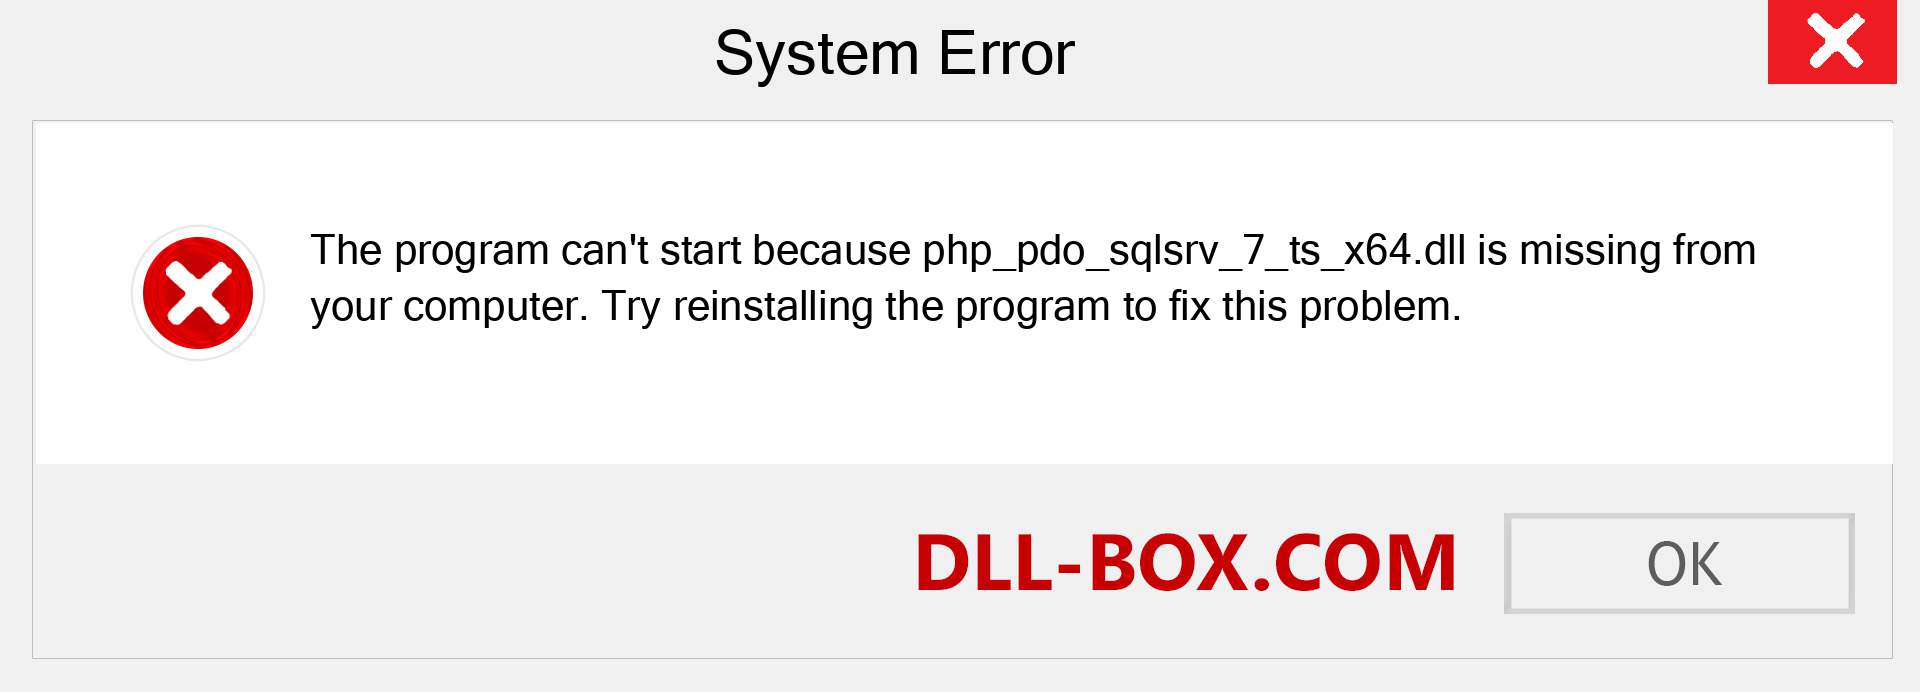  php_pdo_sqlsrv_7_ts_x64.dll file is missing?. Download for Windows 7, 8, 10 - Fix  php_pdo_sqlsrv_7_ts_x64 dll Missing Error on Windows, photos, images